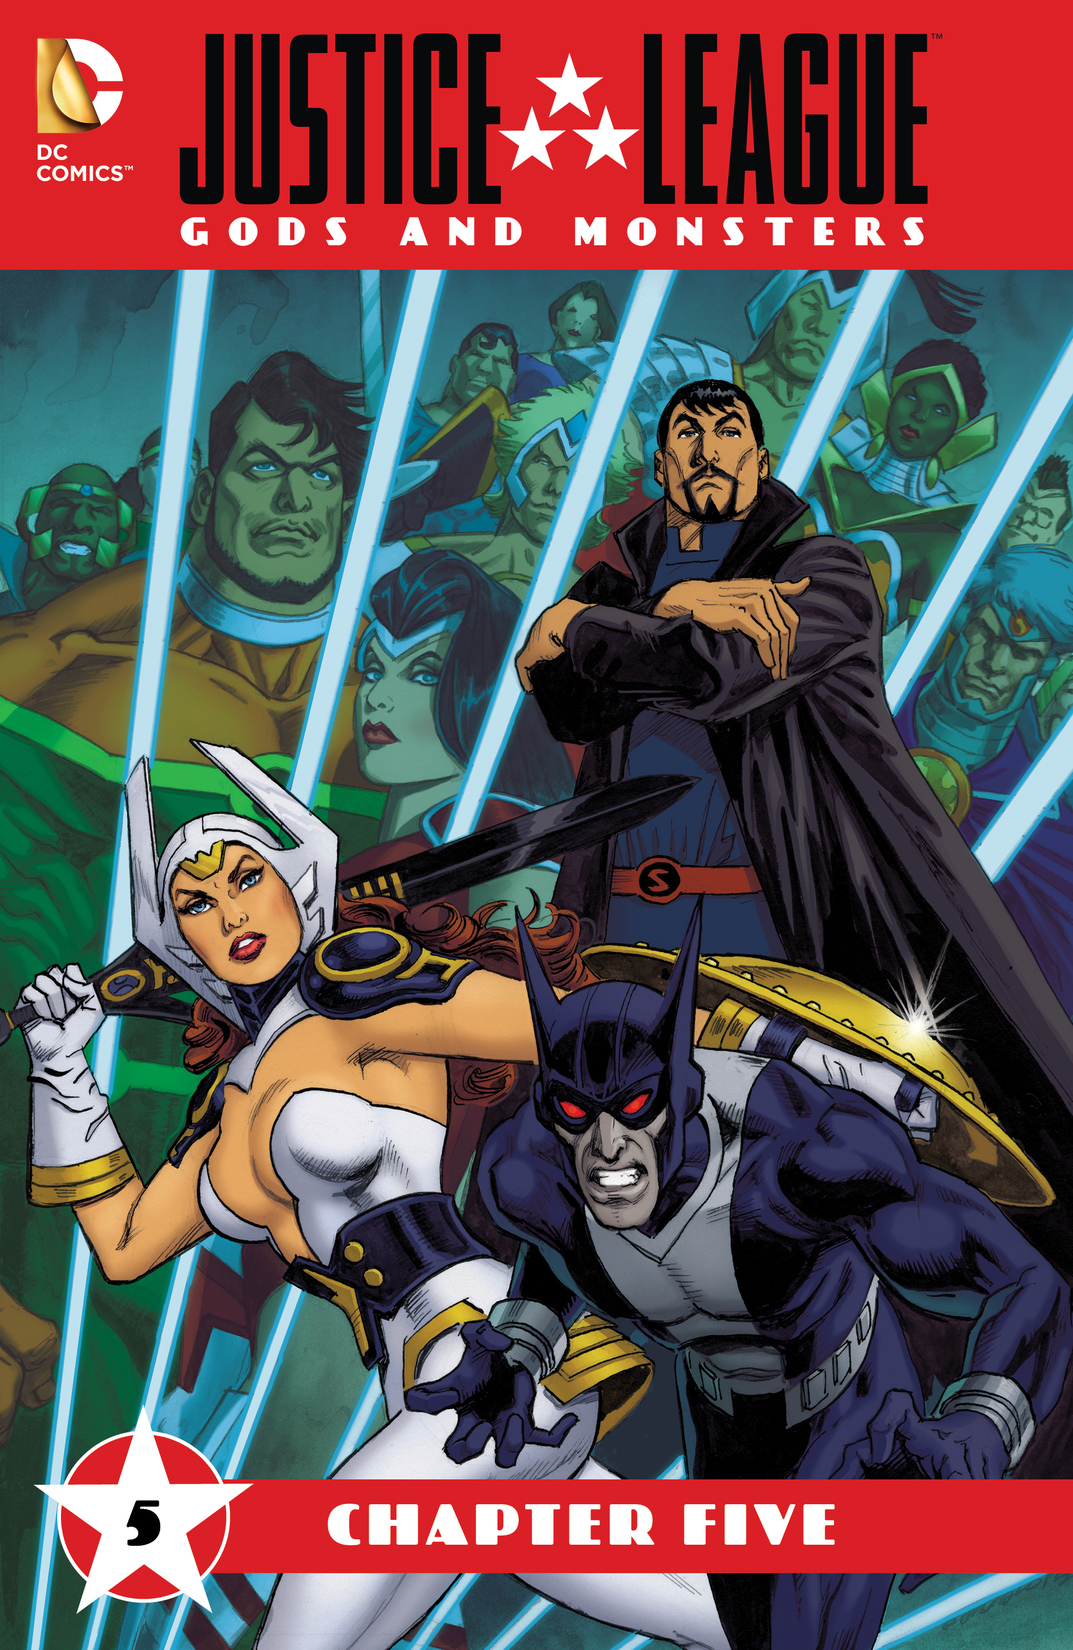 Justice League: Gods & Monsters #5 preview images